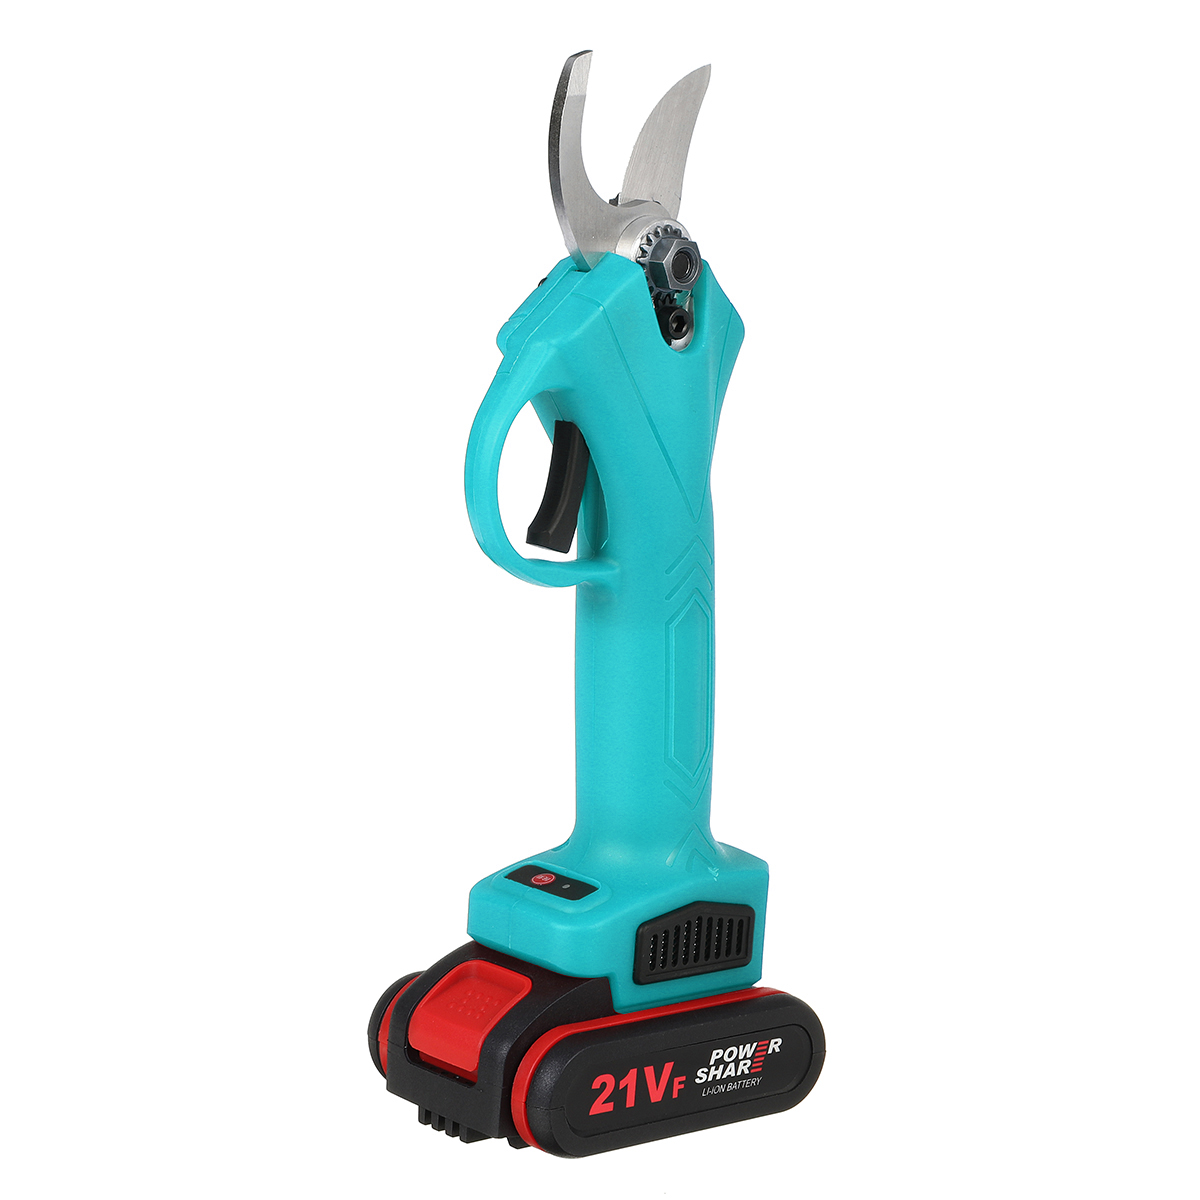 21V-Wireless-25mm-Rechargeable-Electric-Scissors-Branch-Pruning-Shear-Tree-Cutting-Tools-W-2-Battery-1749247-8